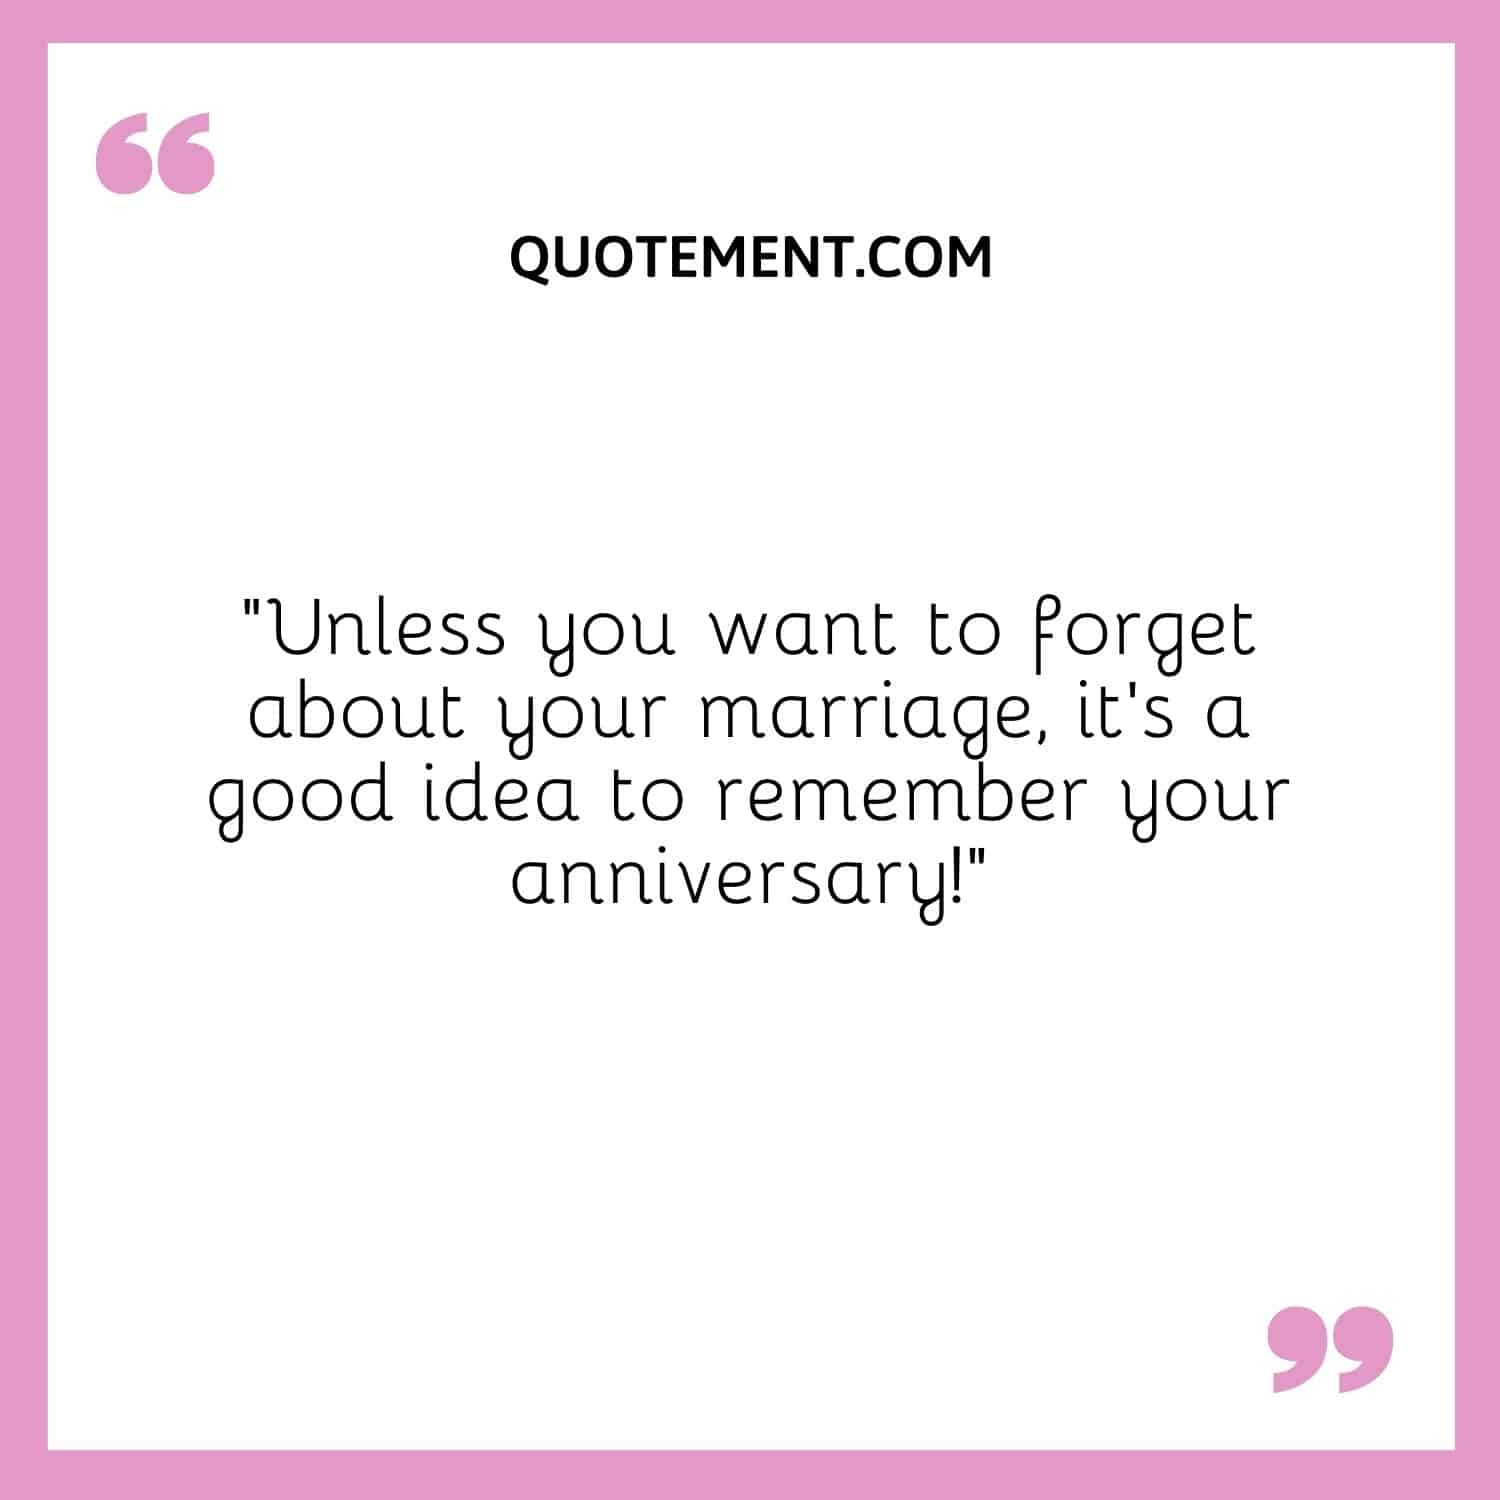 Unless you want to forget about your marriage, it’s a good idea to remember your anniversary